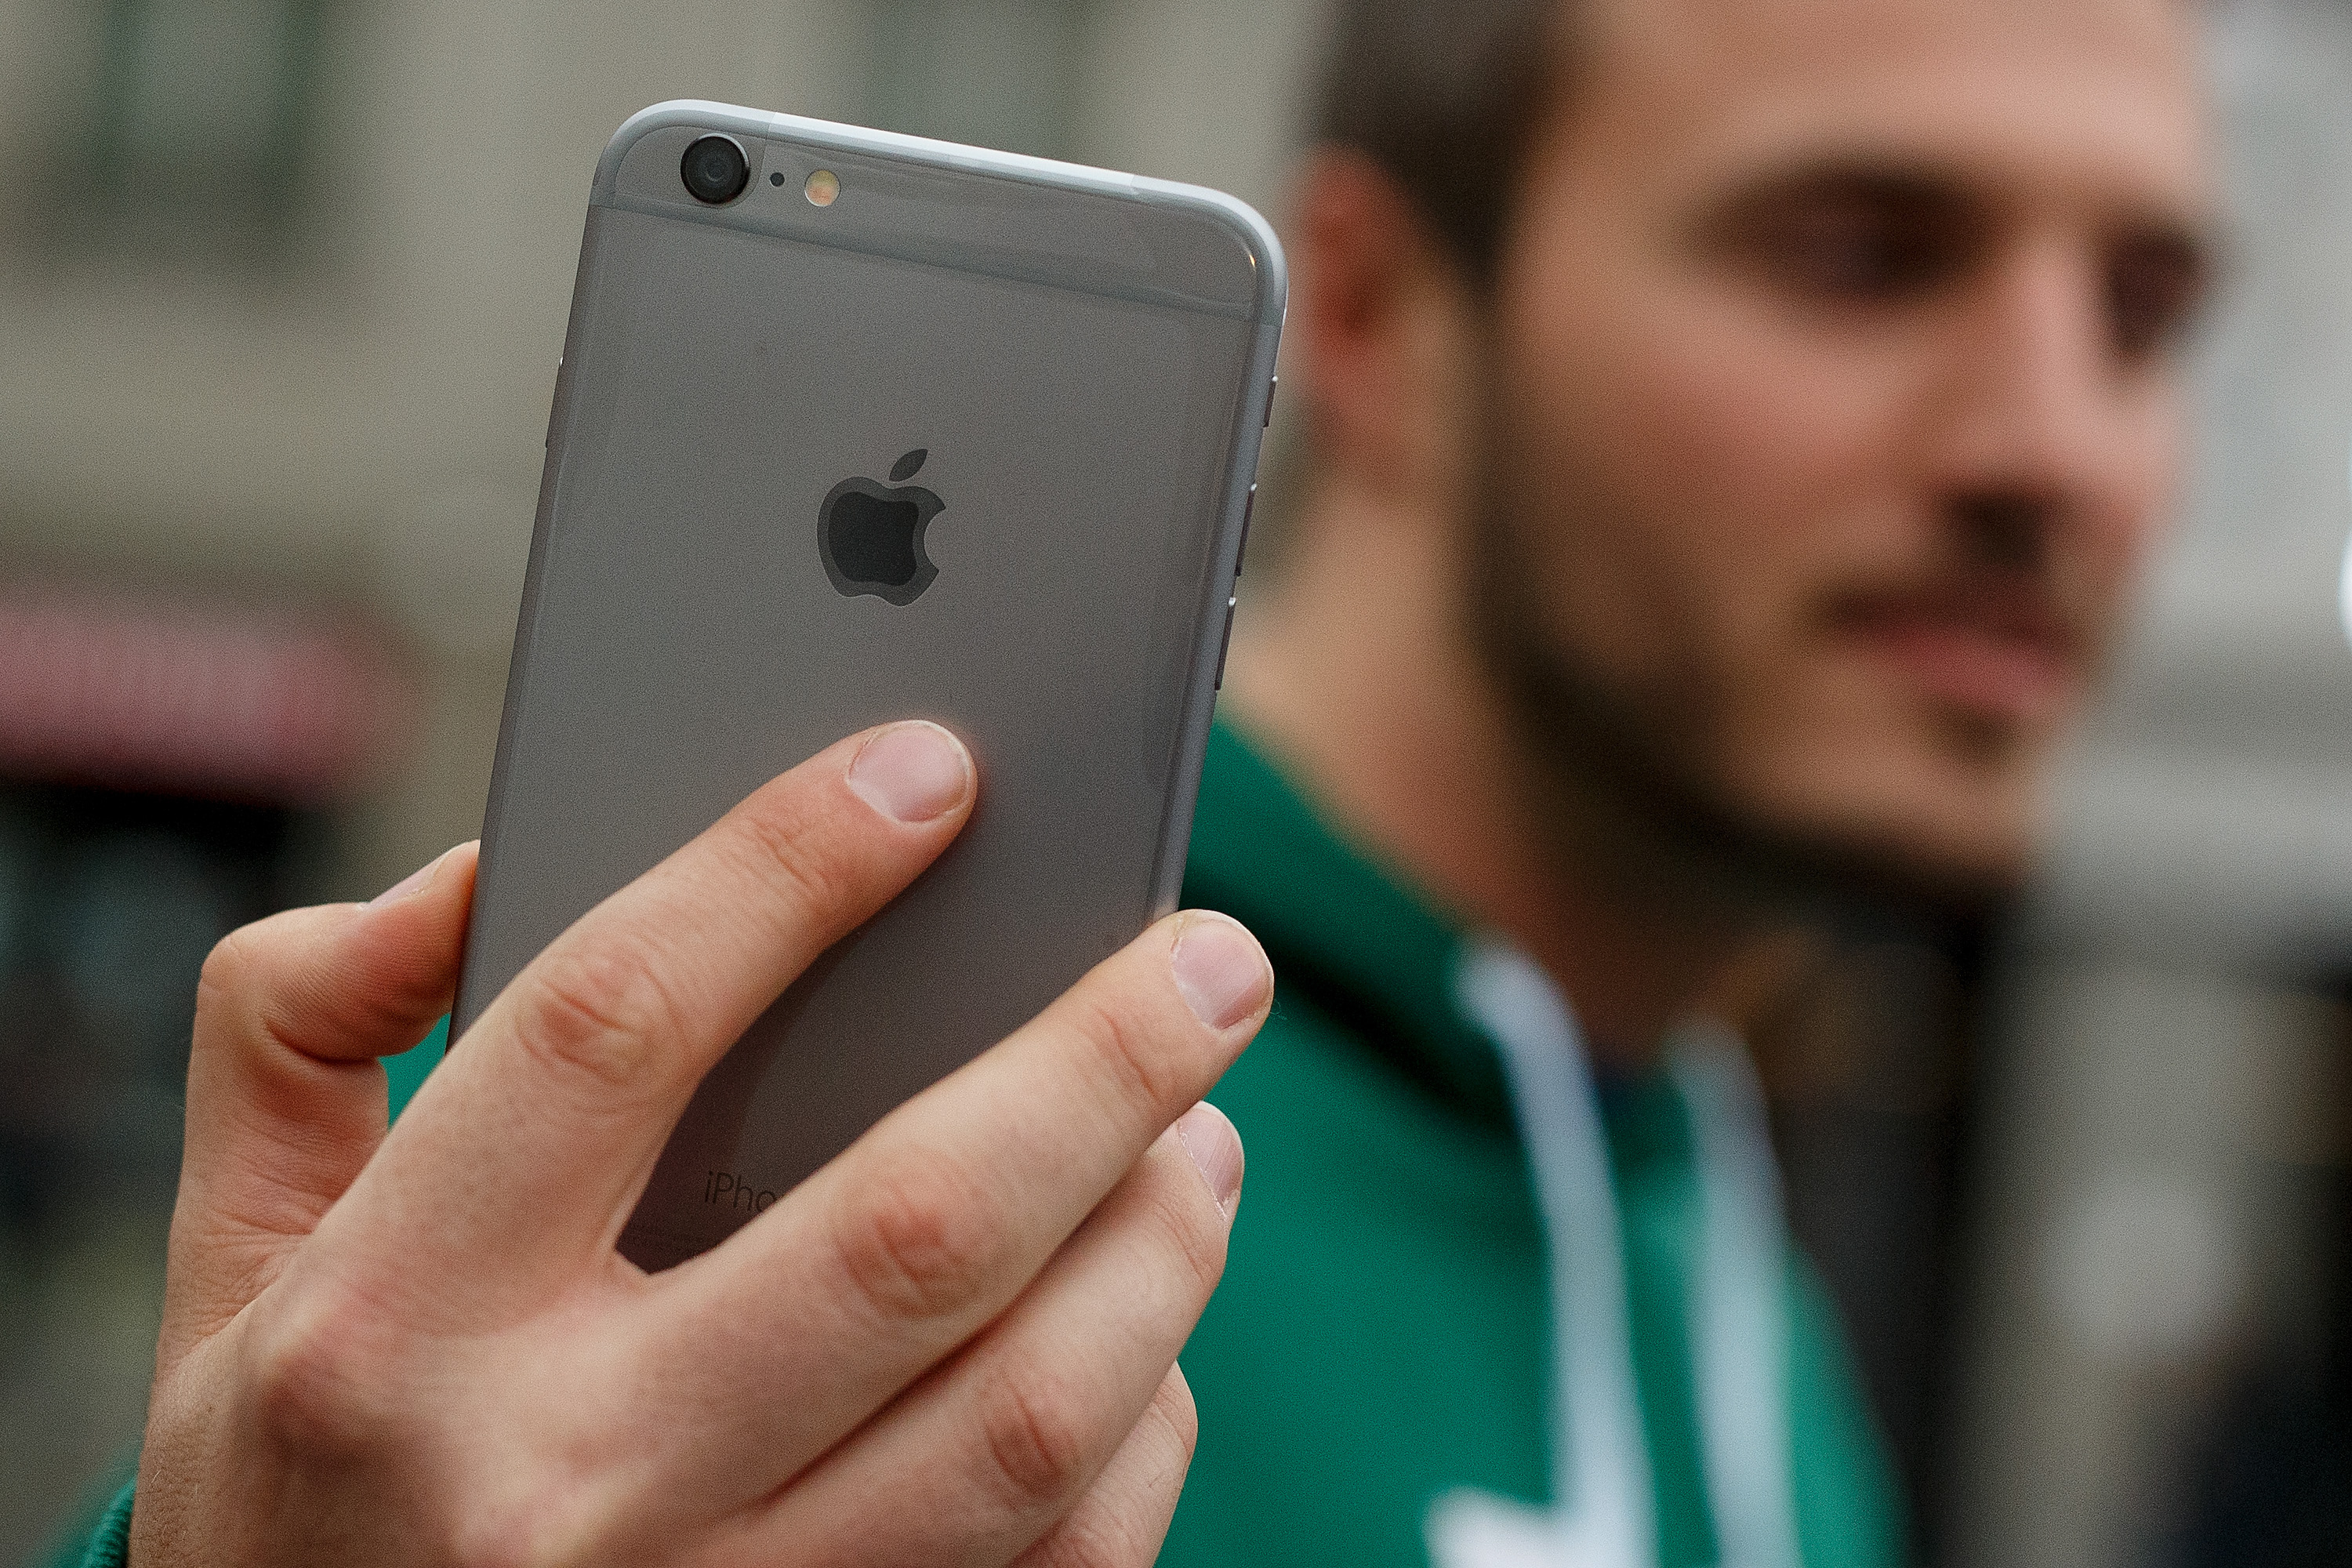 A man shows his new iPhone outside Puerta del Sol Apple Store as Apple launches iPhone 6 and iPhone 6 Plus on September 26, 2014 in Madrid, Spain. (Pablo Blazquez Dominguez&mdash;Getty Images)